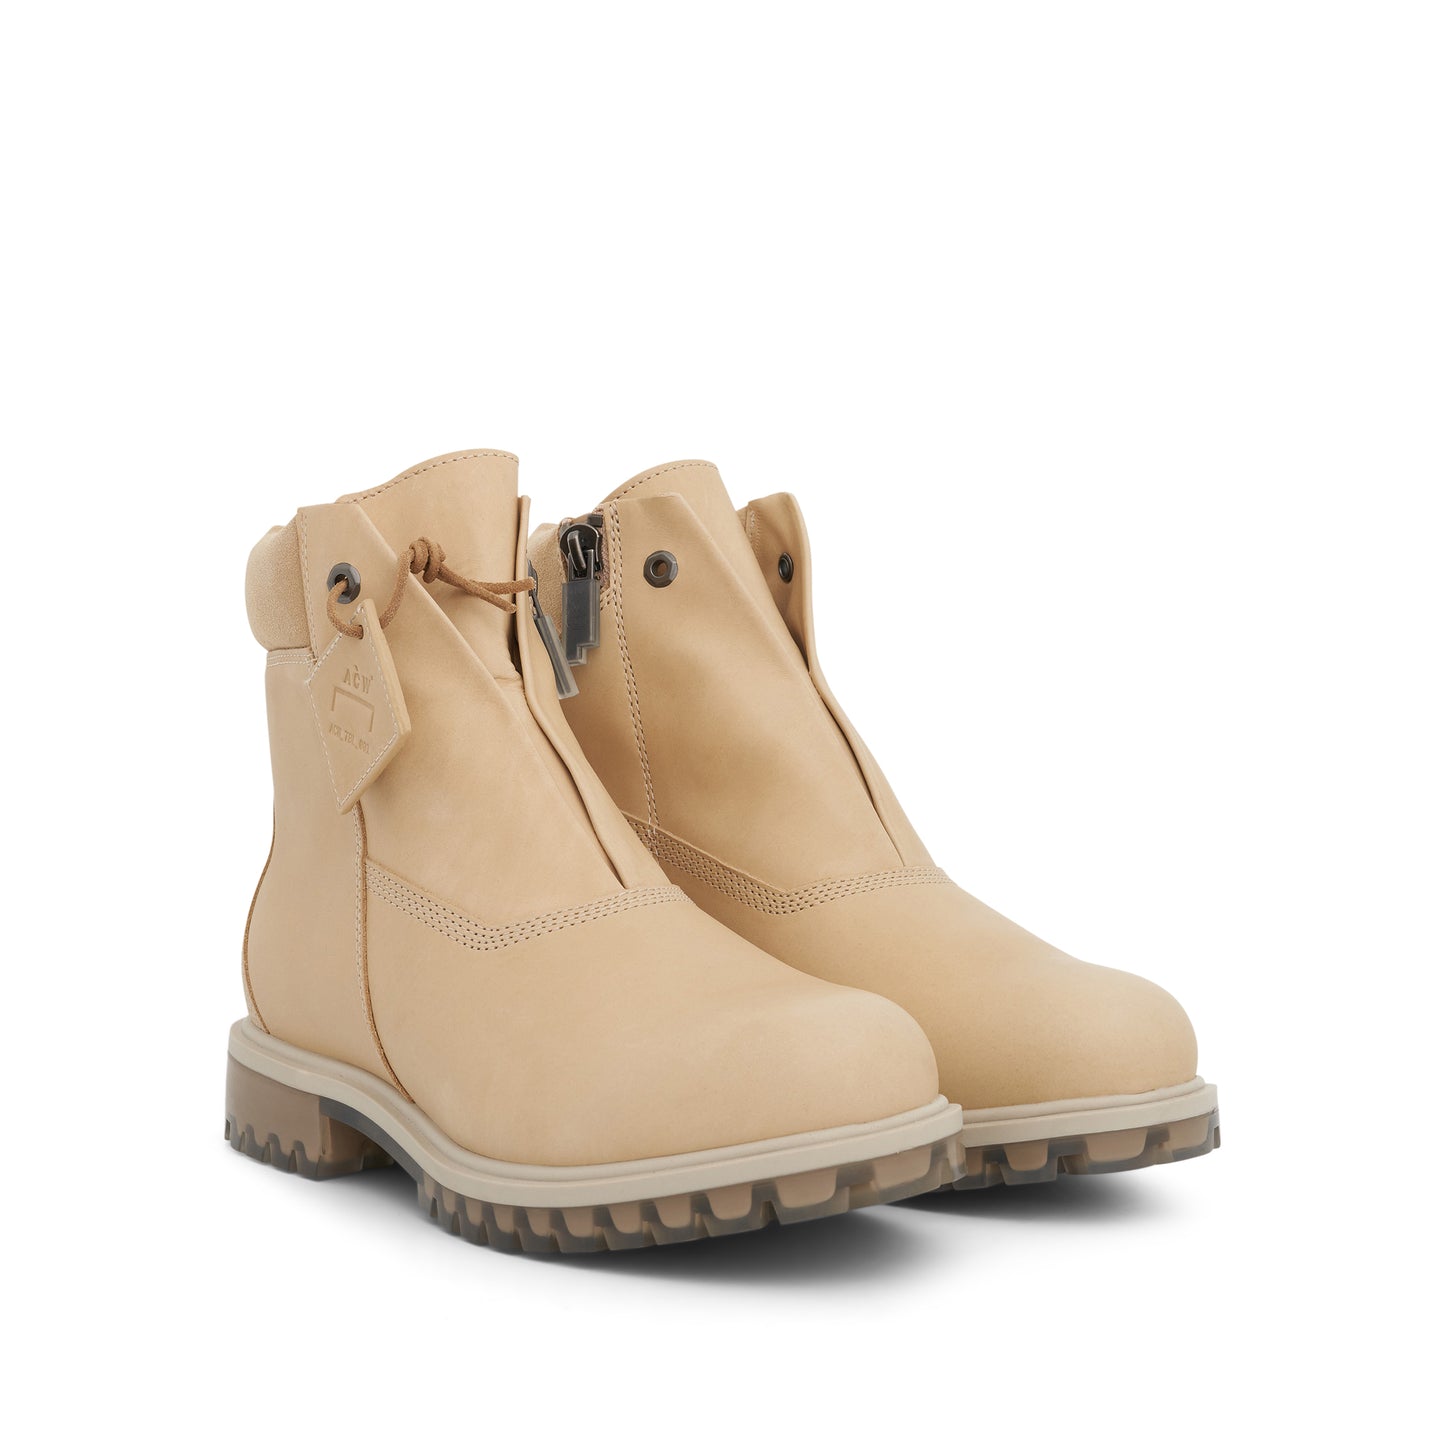 ACW x Timberland 6 Inch Boots in Stone